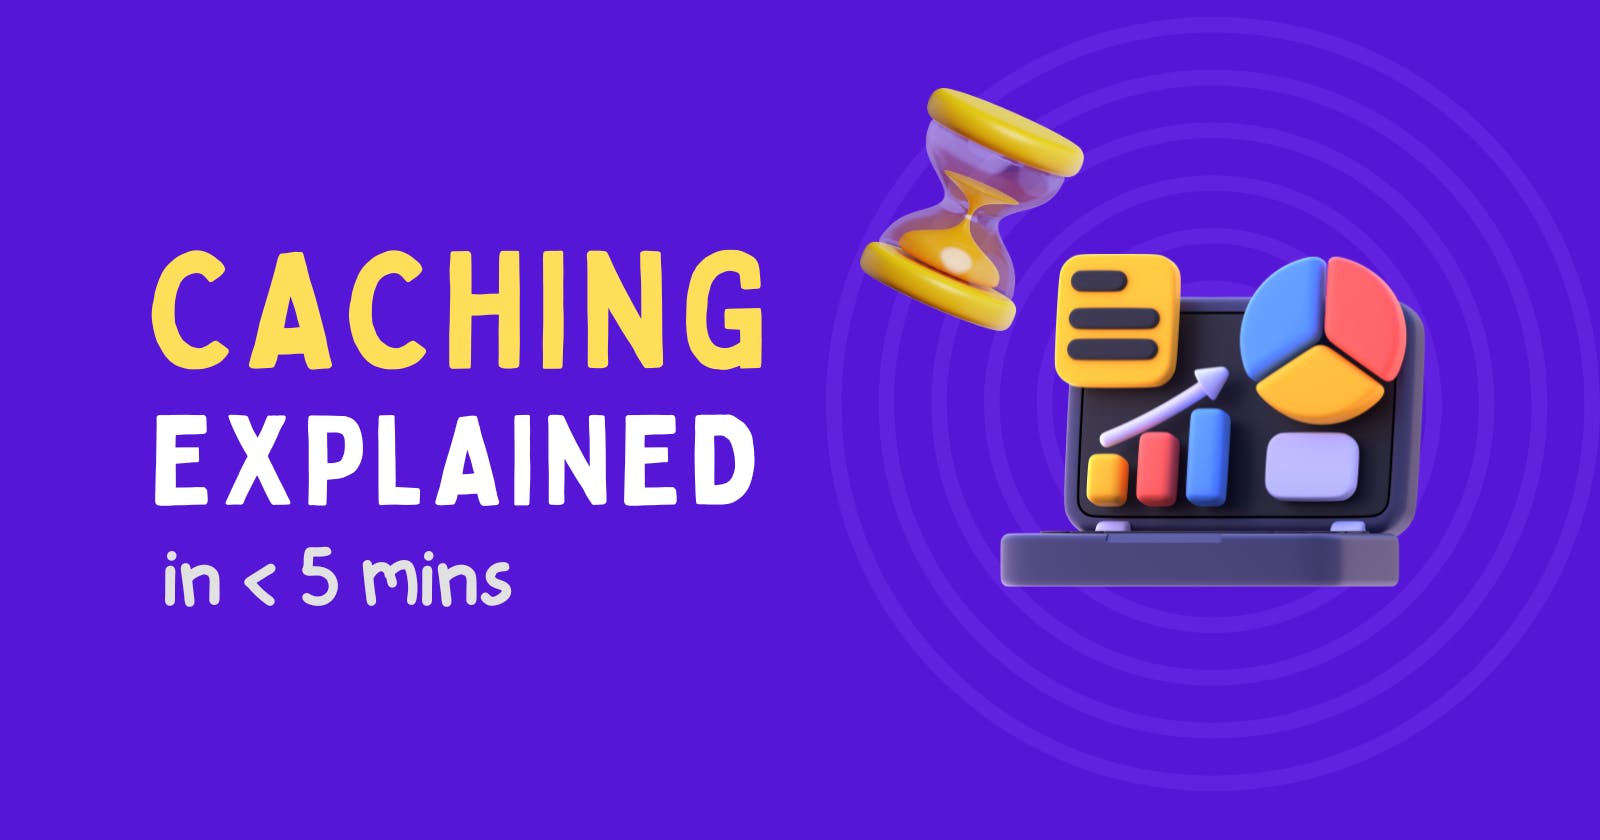 Caching explained in <5 minutes